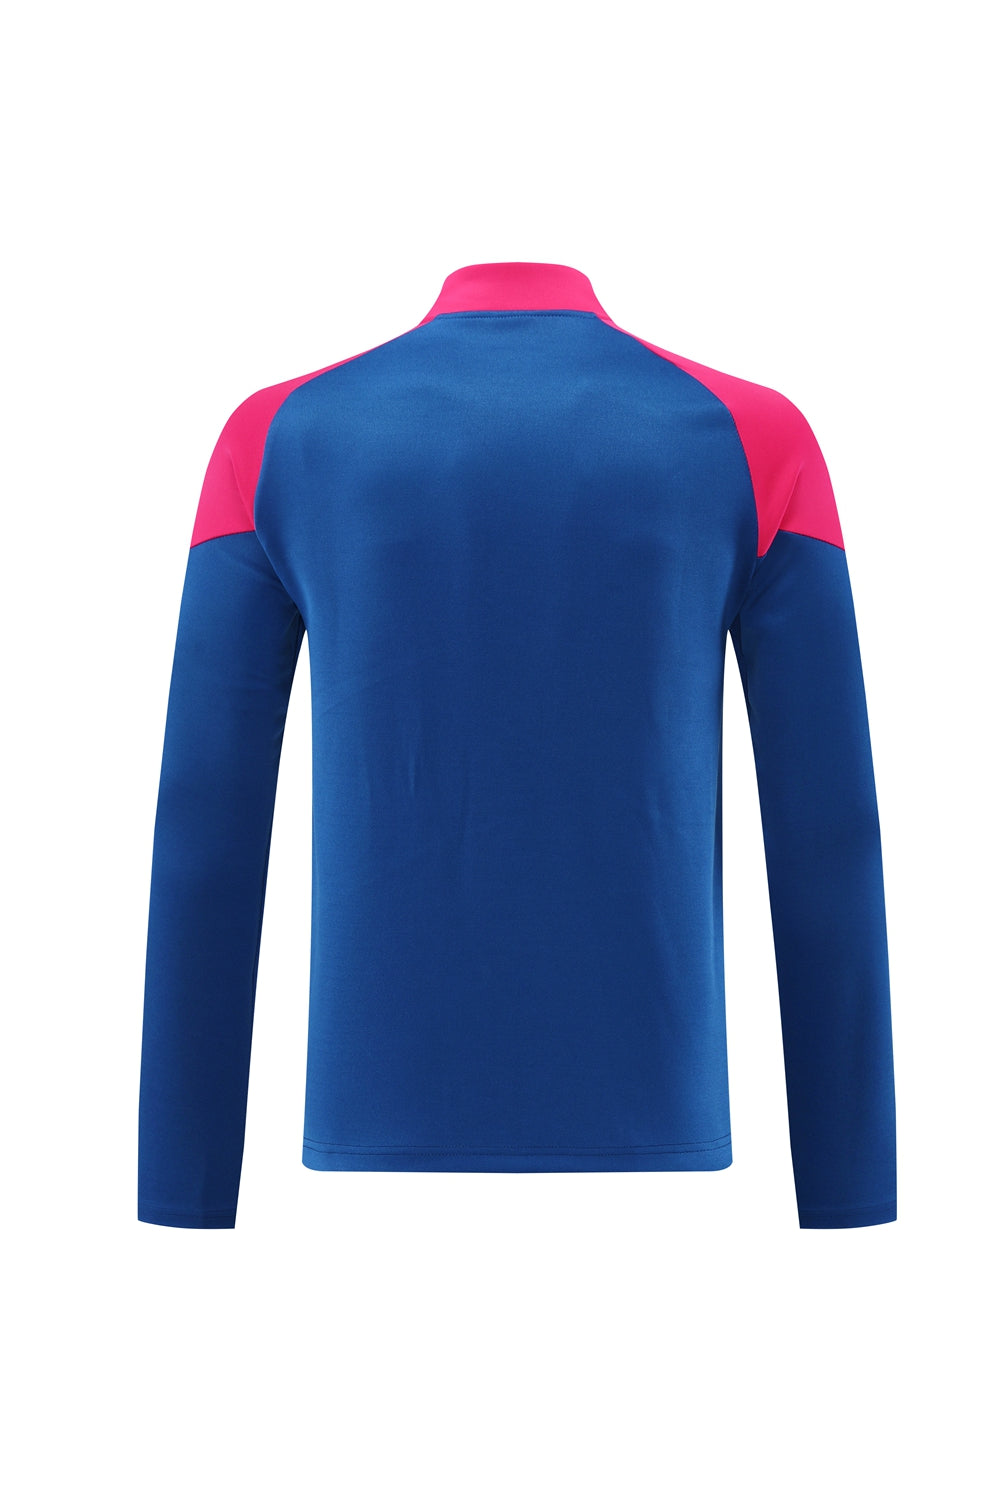 AC Milan 24/25 Full-Zip TrackSuit - Blue and Pink